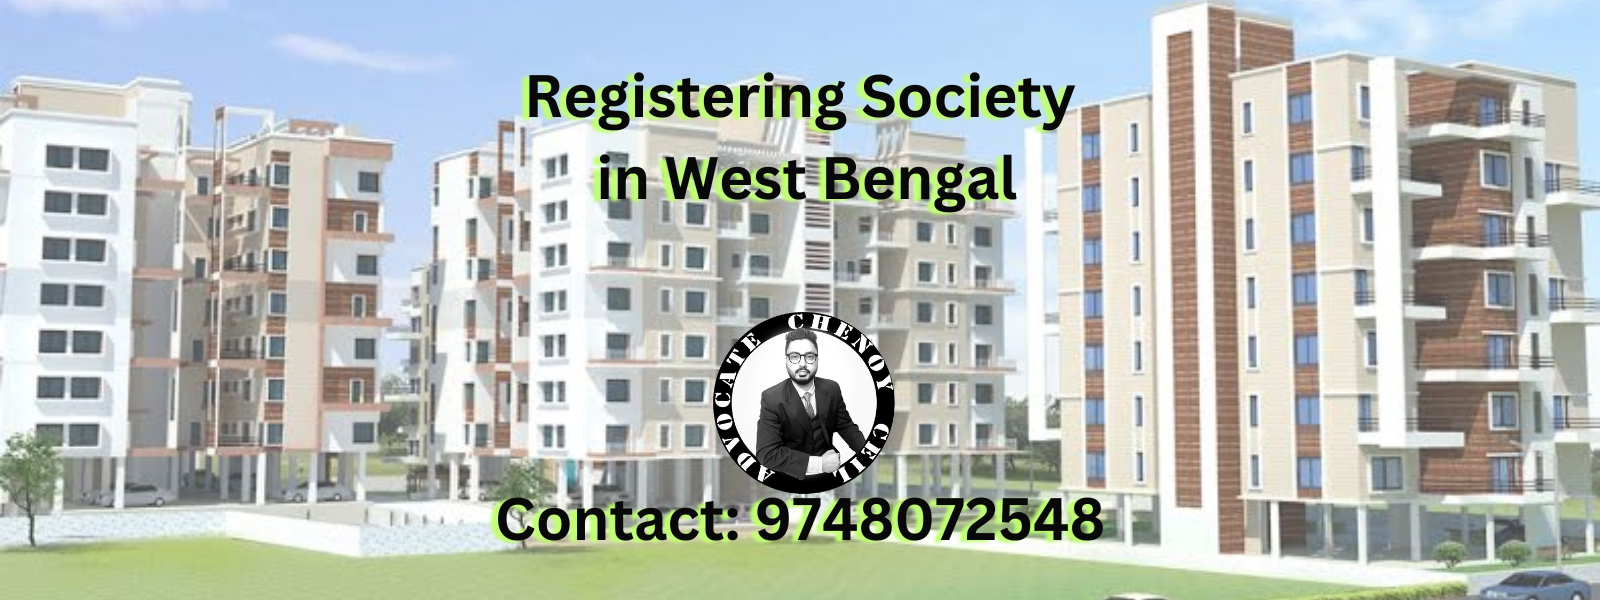 How to Register Housing Society in West Bengal